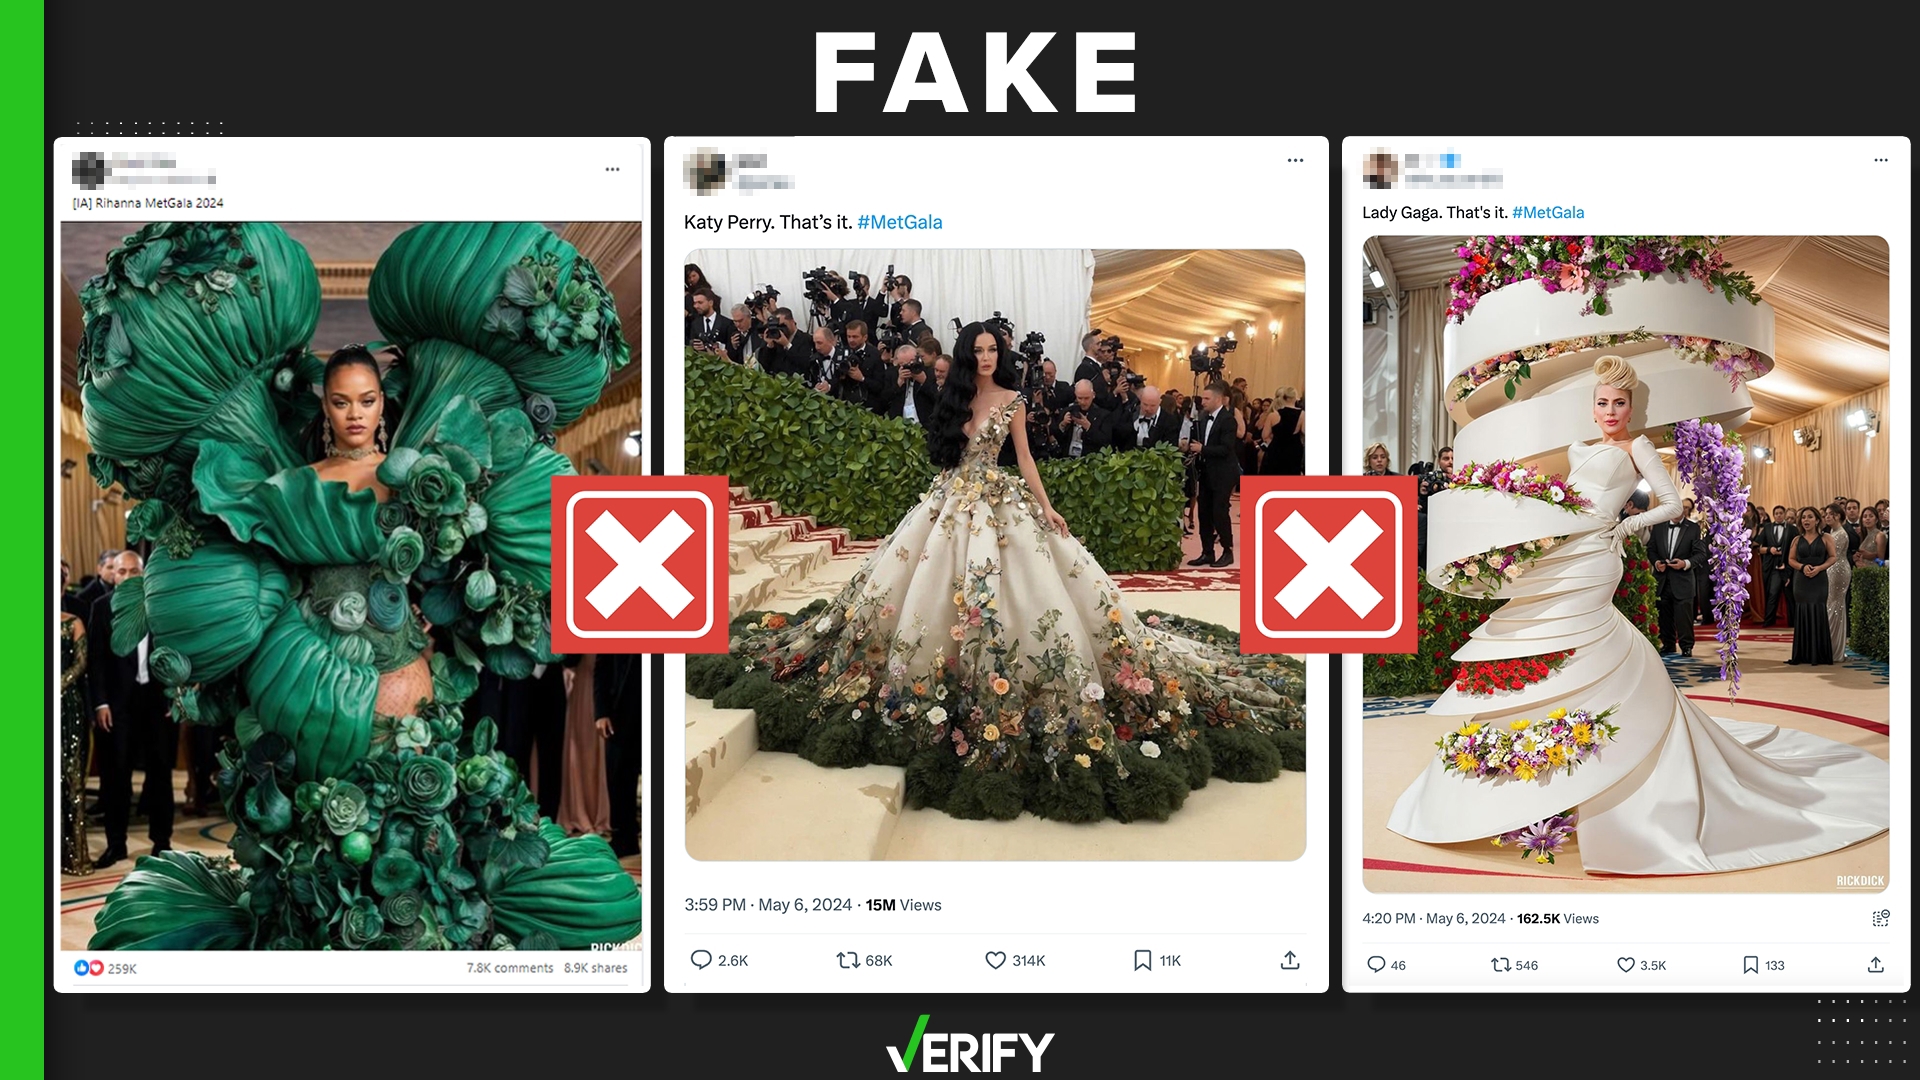 Images of celebrities created with artificial intelligence dominated social media on one of fashion's biggest nights, the annual Met Gala.